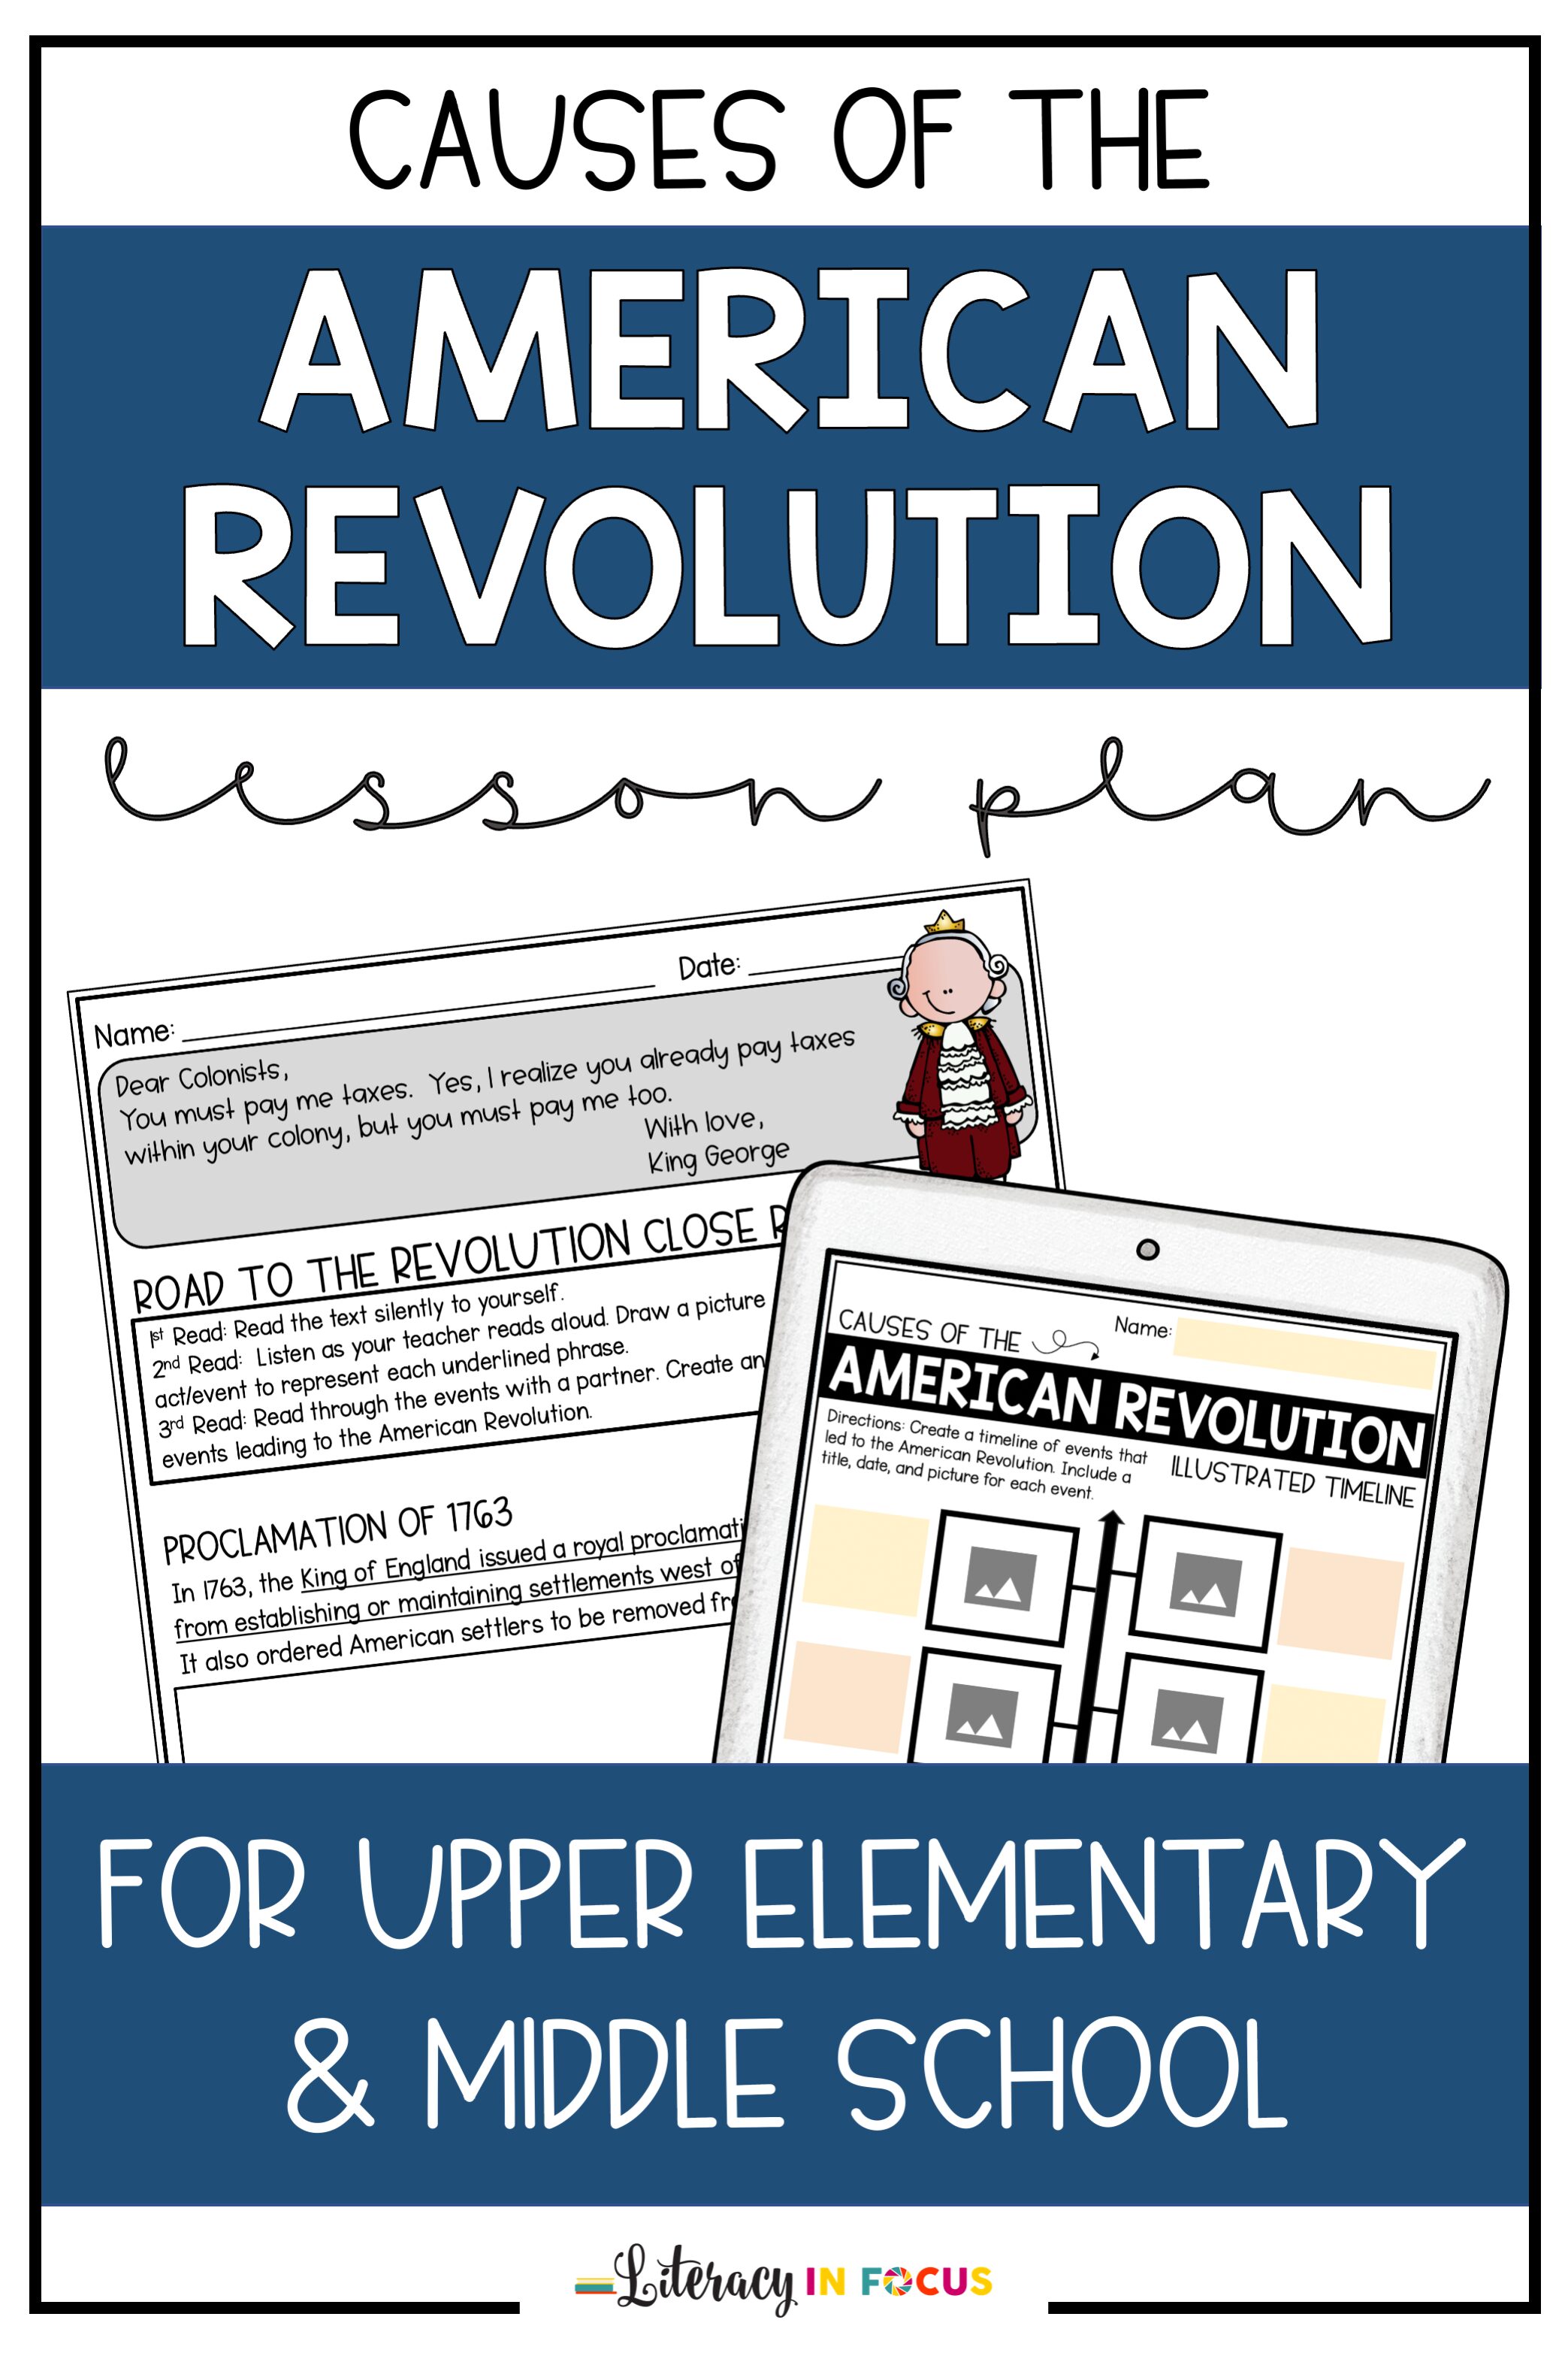 Causes of the American Revolution Lesson Plan for Upper Elementary and Middle School